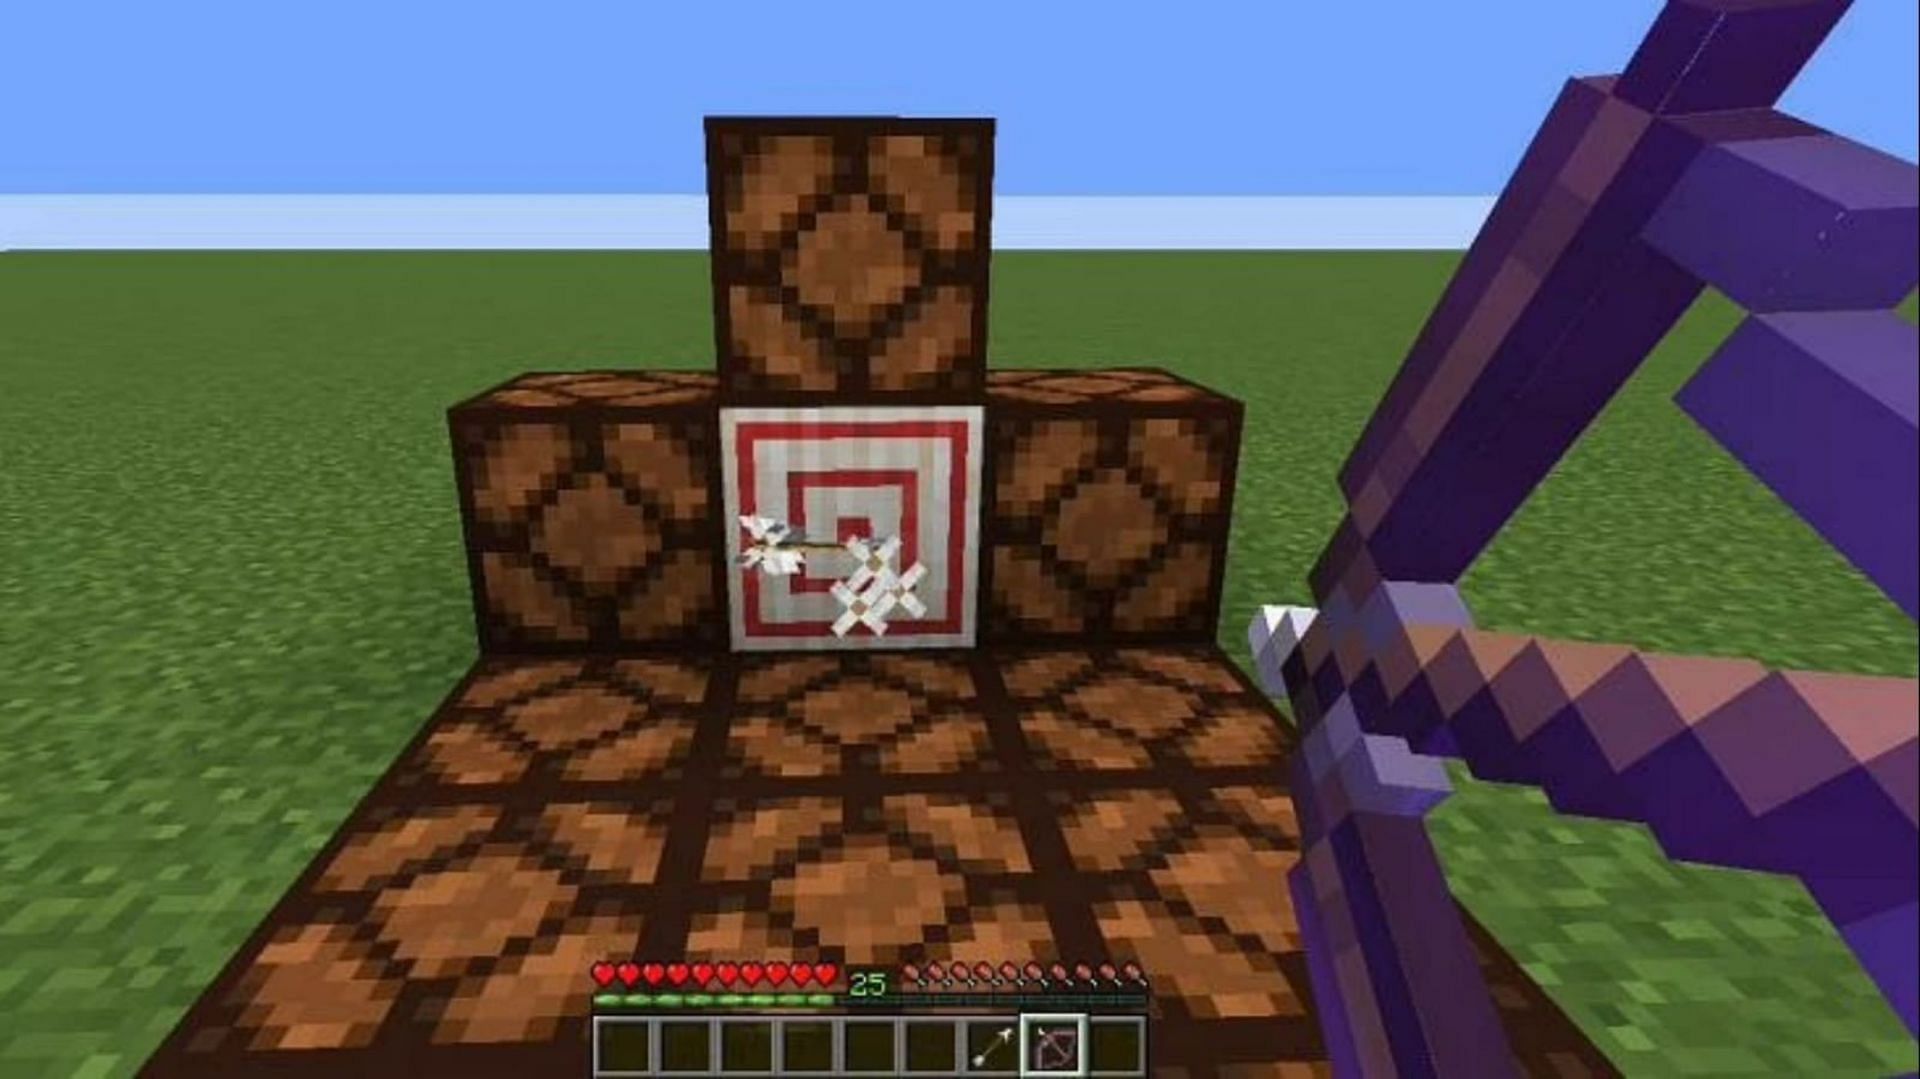 Ammunition is a thing of the past with Infinity (Image via Mojang)